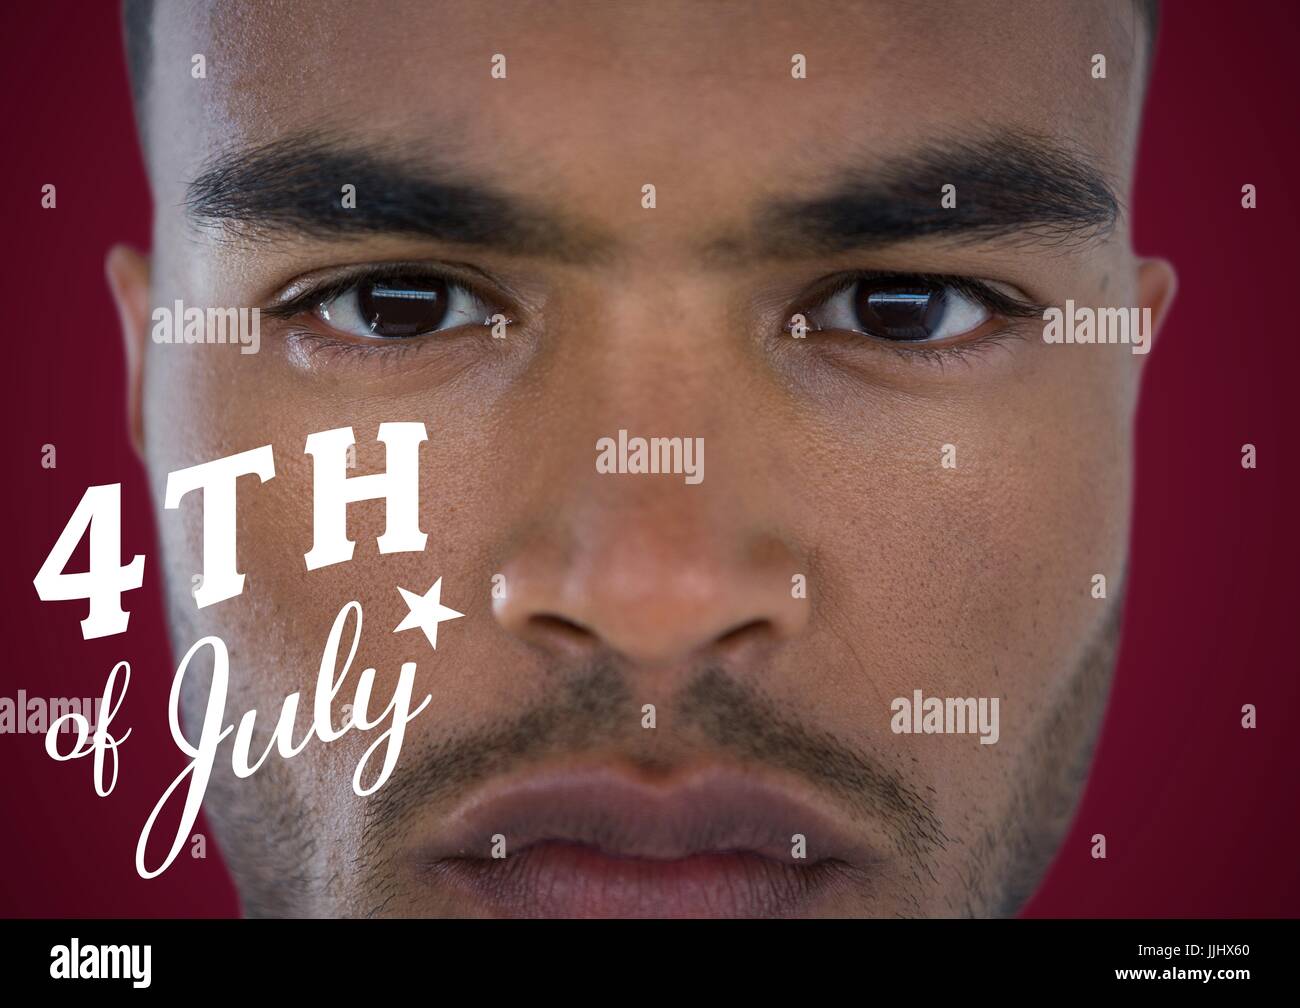 Portraiture of man with white fourth of July graphic against maroon background Stock Photo